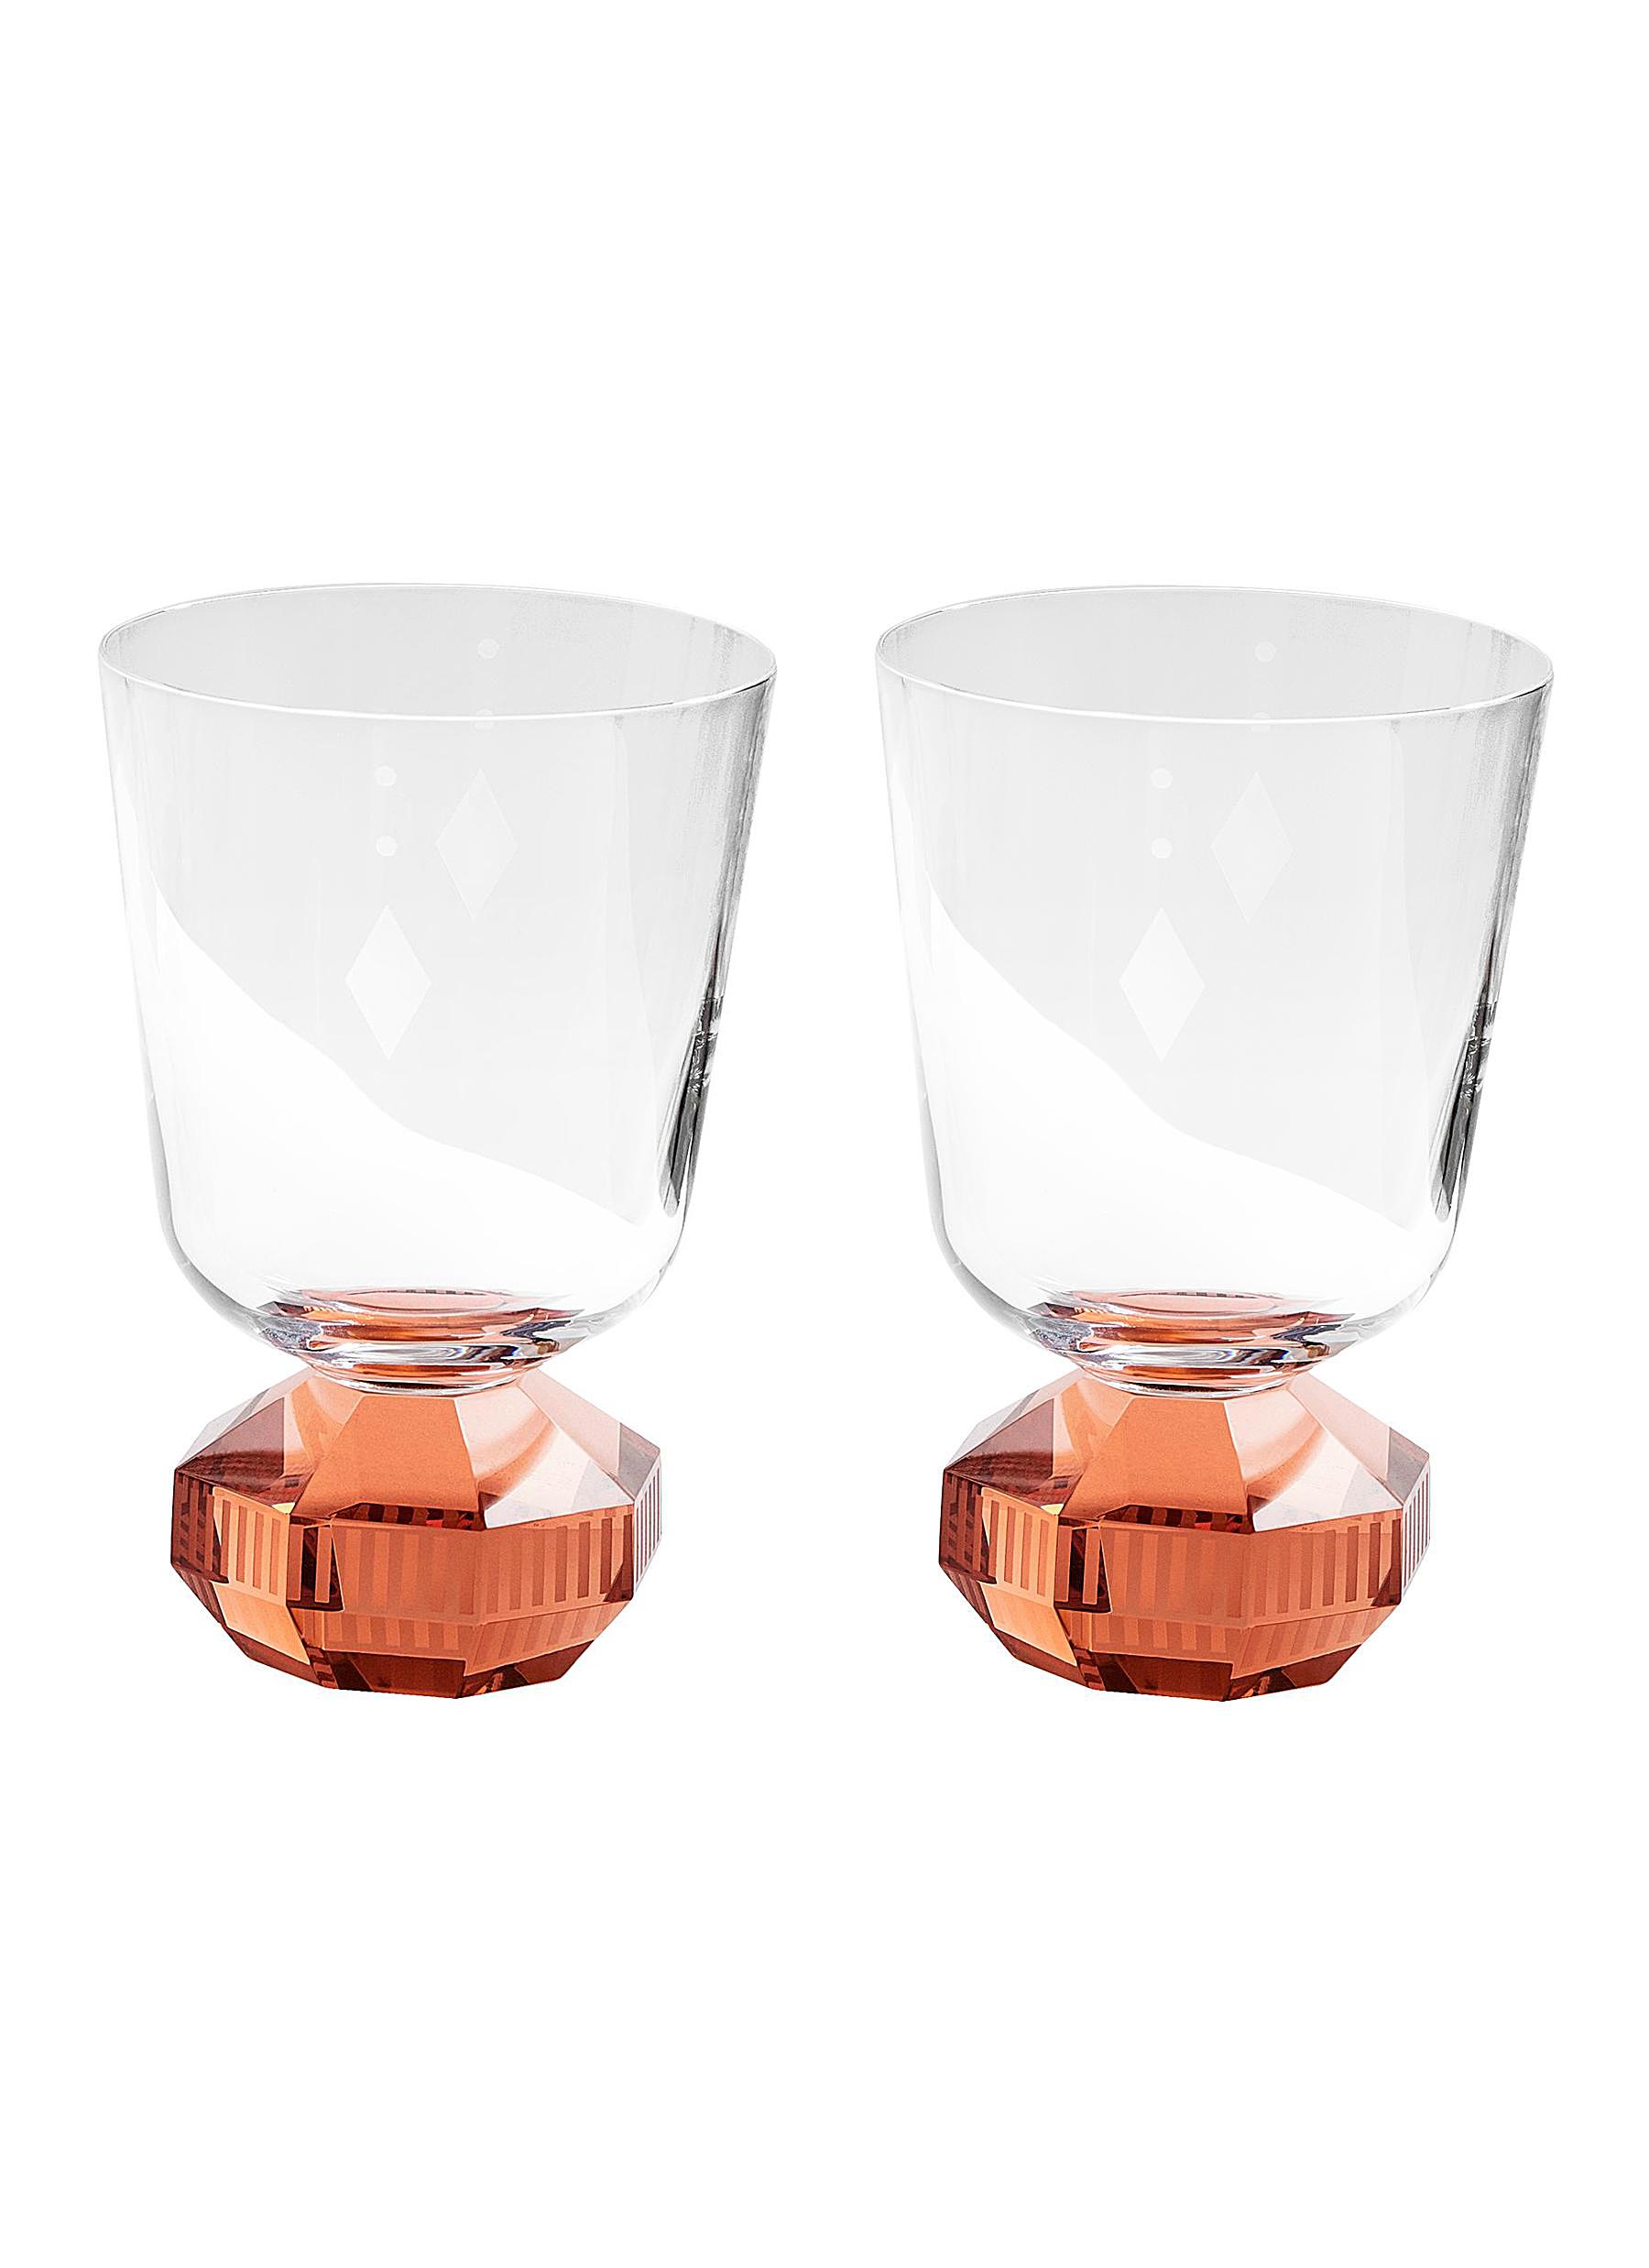 CHELSEA LOW CRYSTAL GLASS SET OF 2 - ROUGE